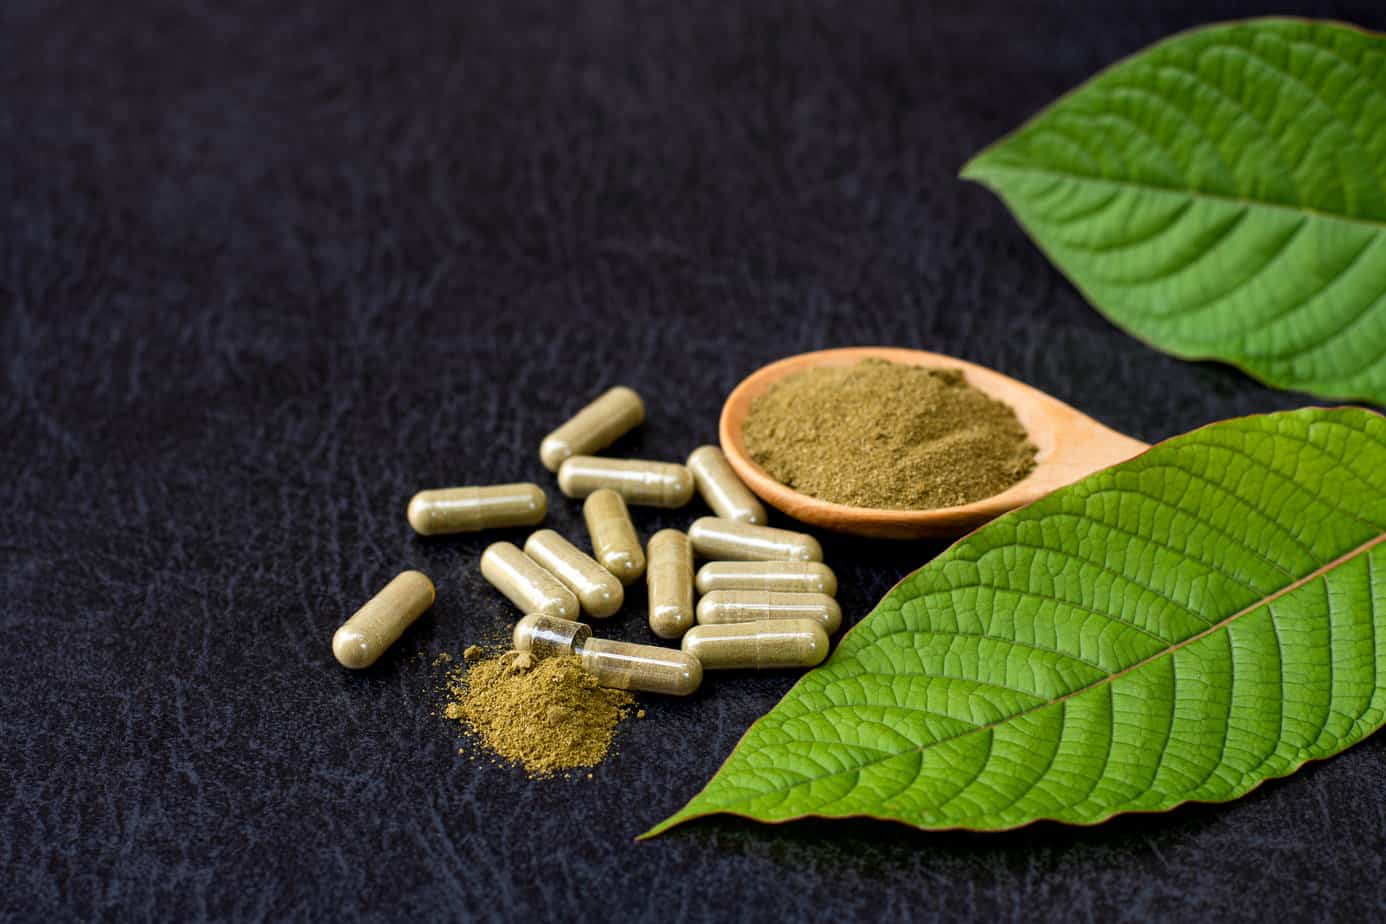 kratom in different forms, including powder, leaf, and capsule